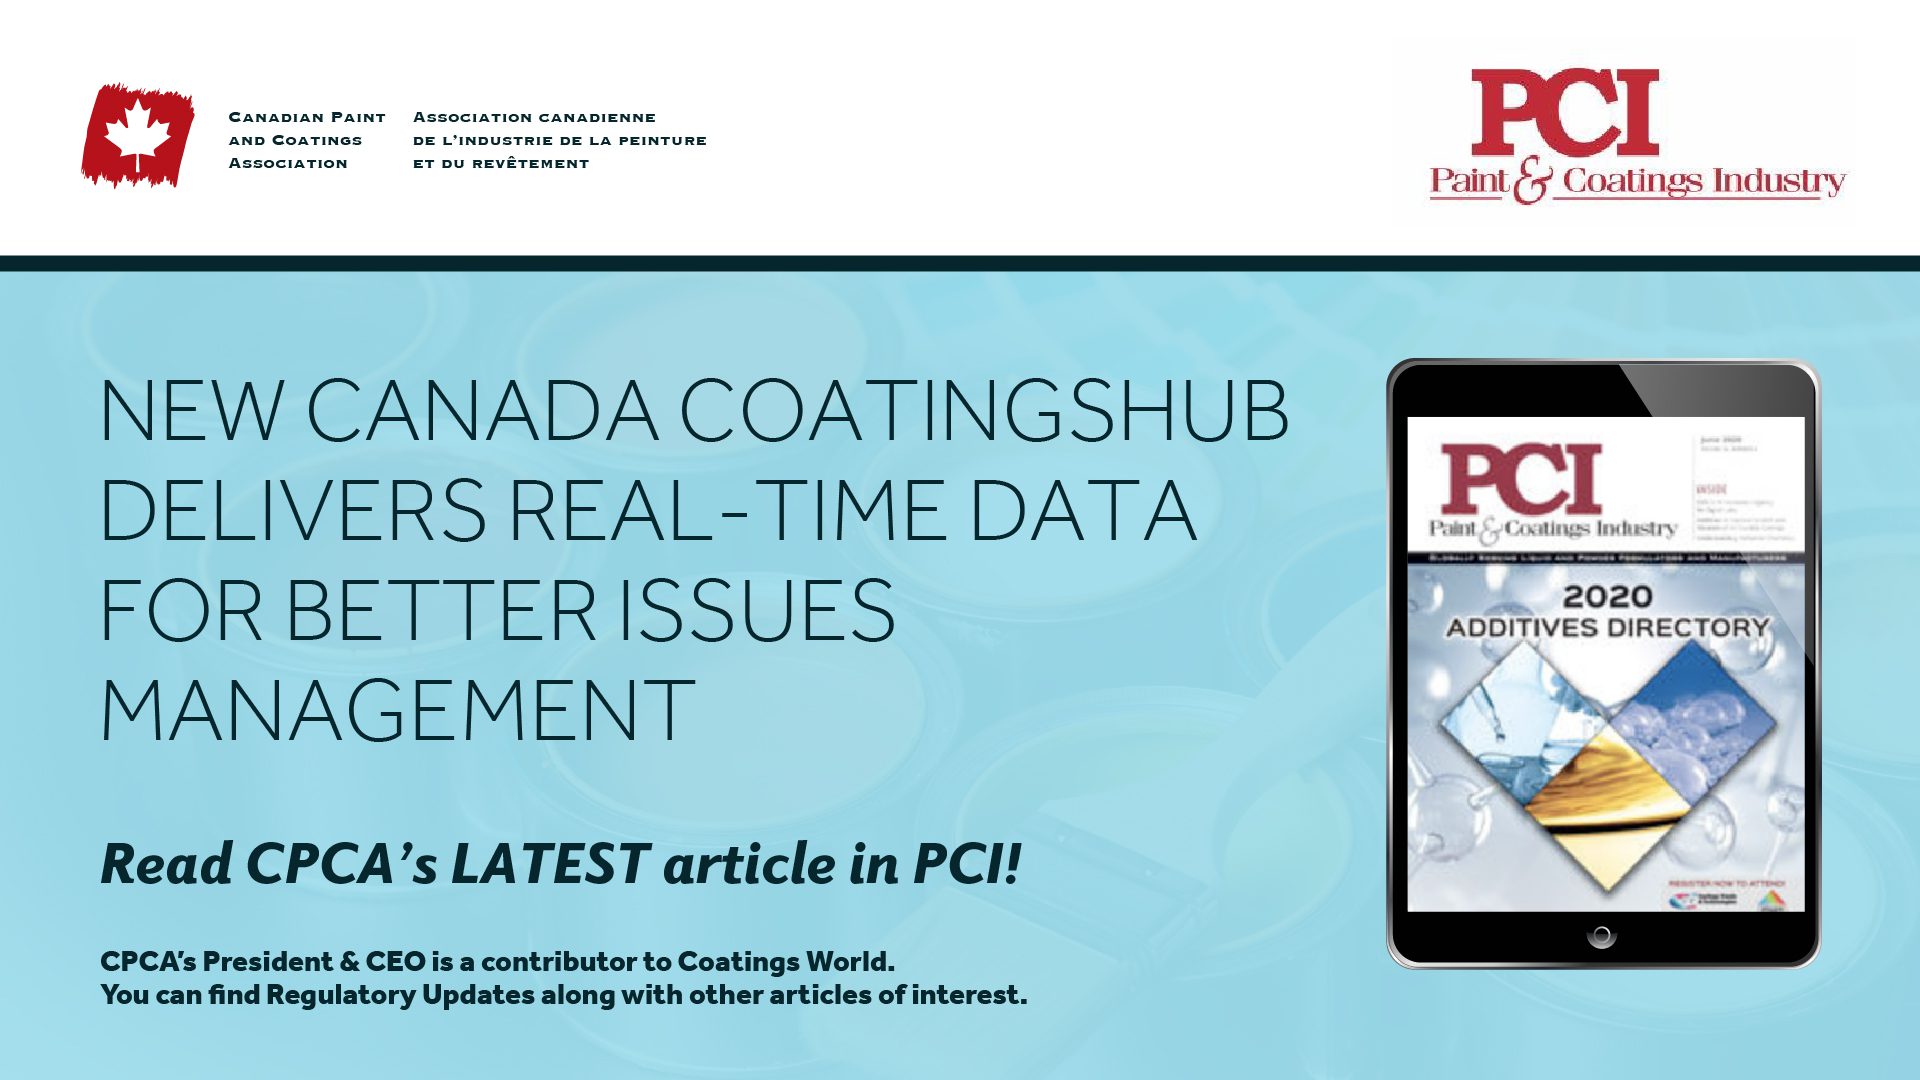 Canada CoatingsHUB Delivers Real-time Data